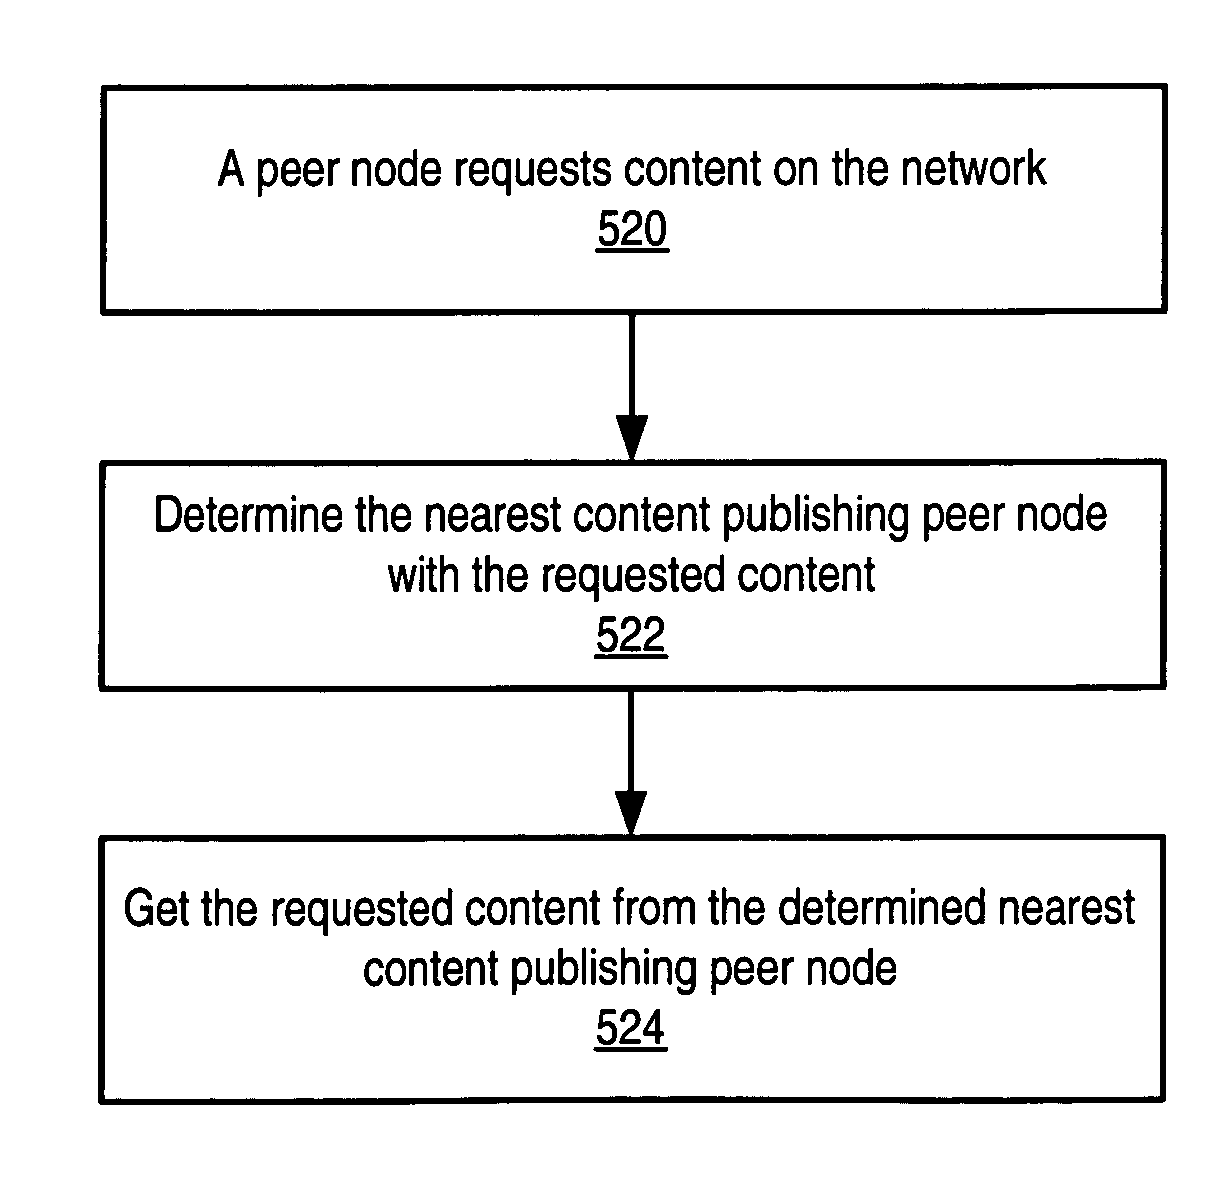 Peer-to-peer content sharing/distribution networks